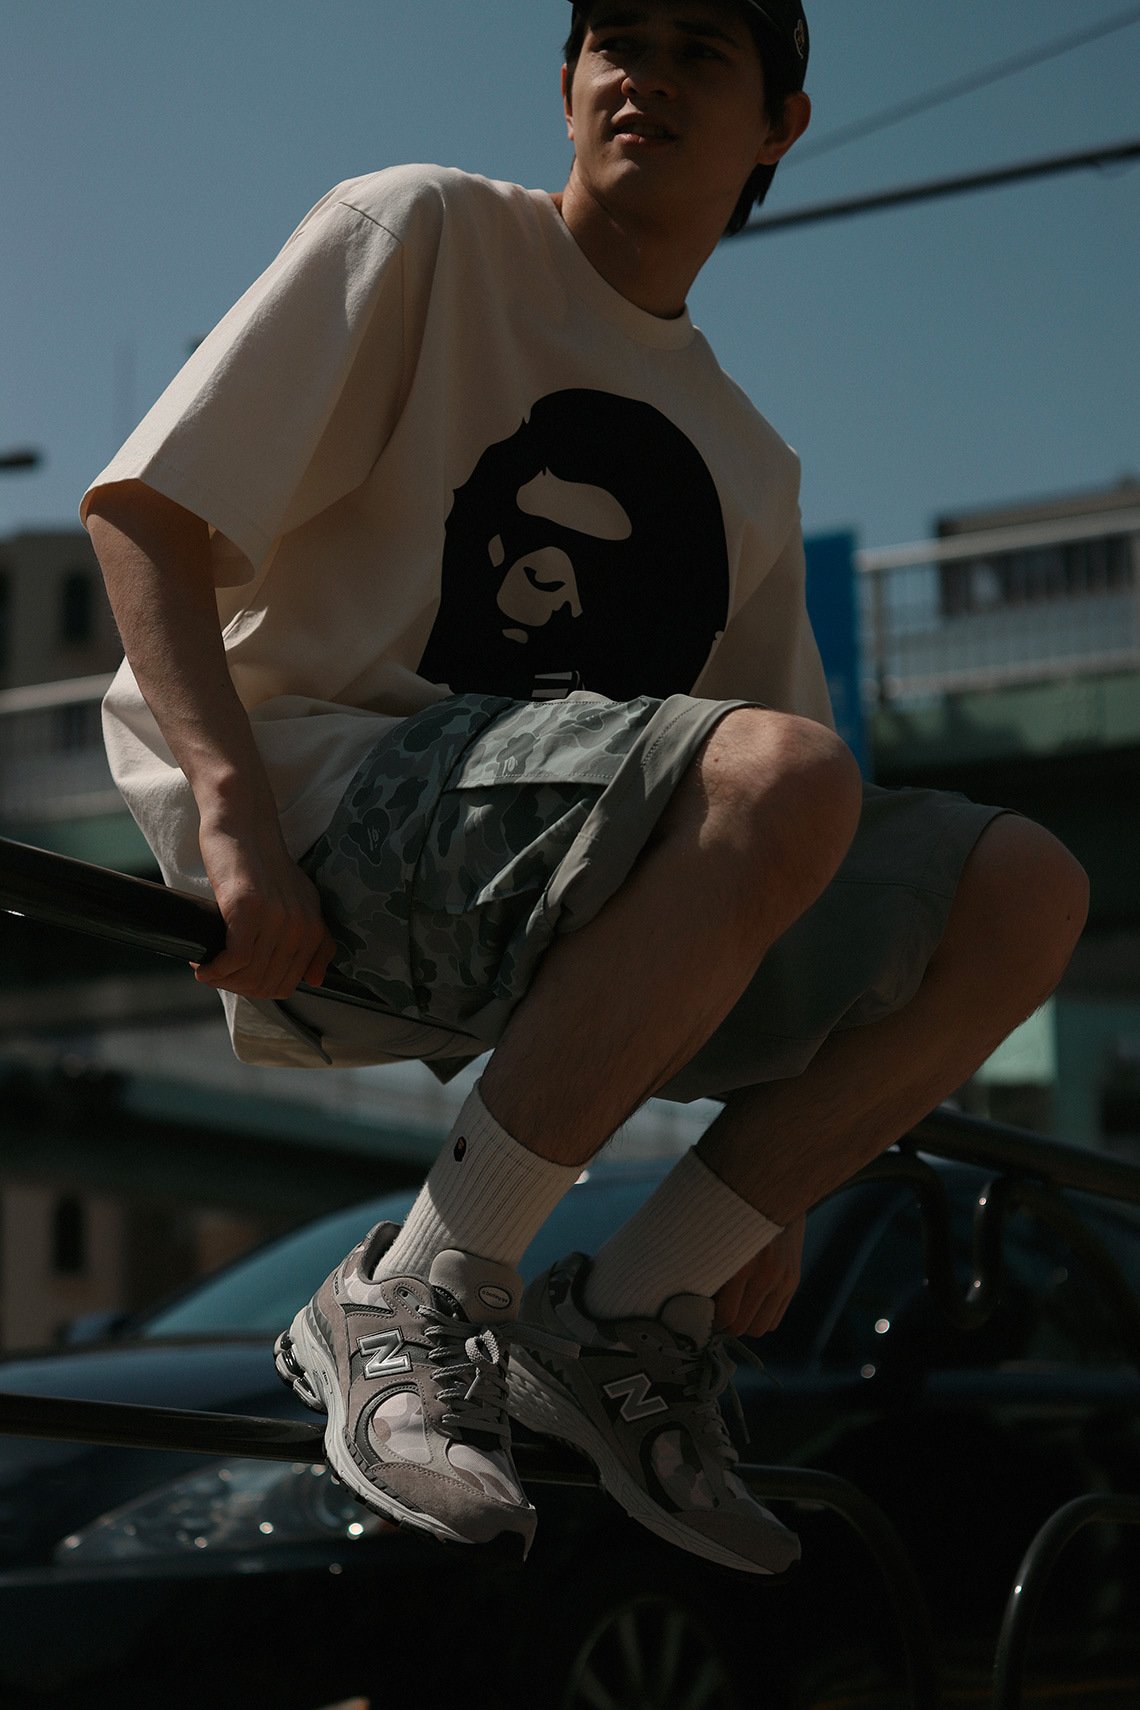 BAPE x New Balance - Collection "Apes Together Strong"